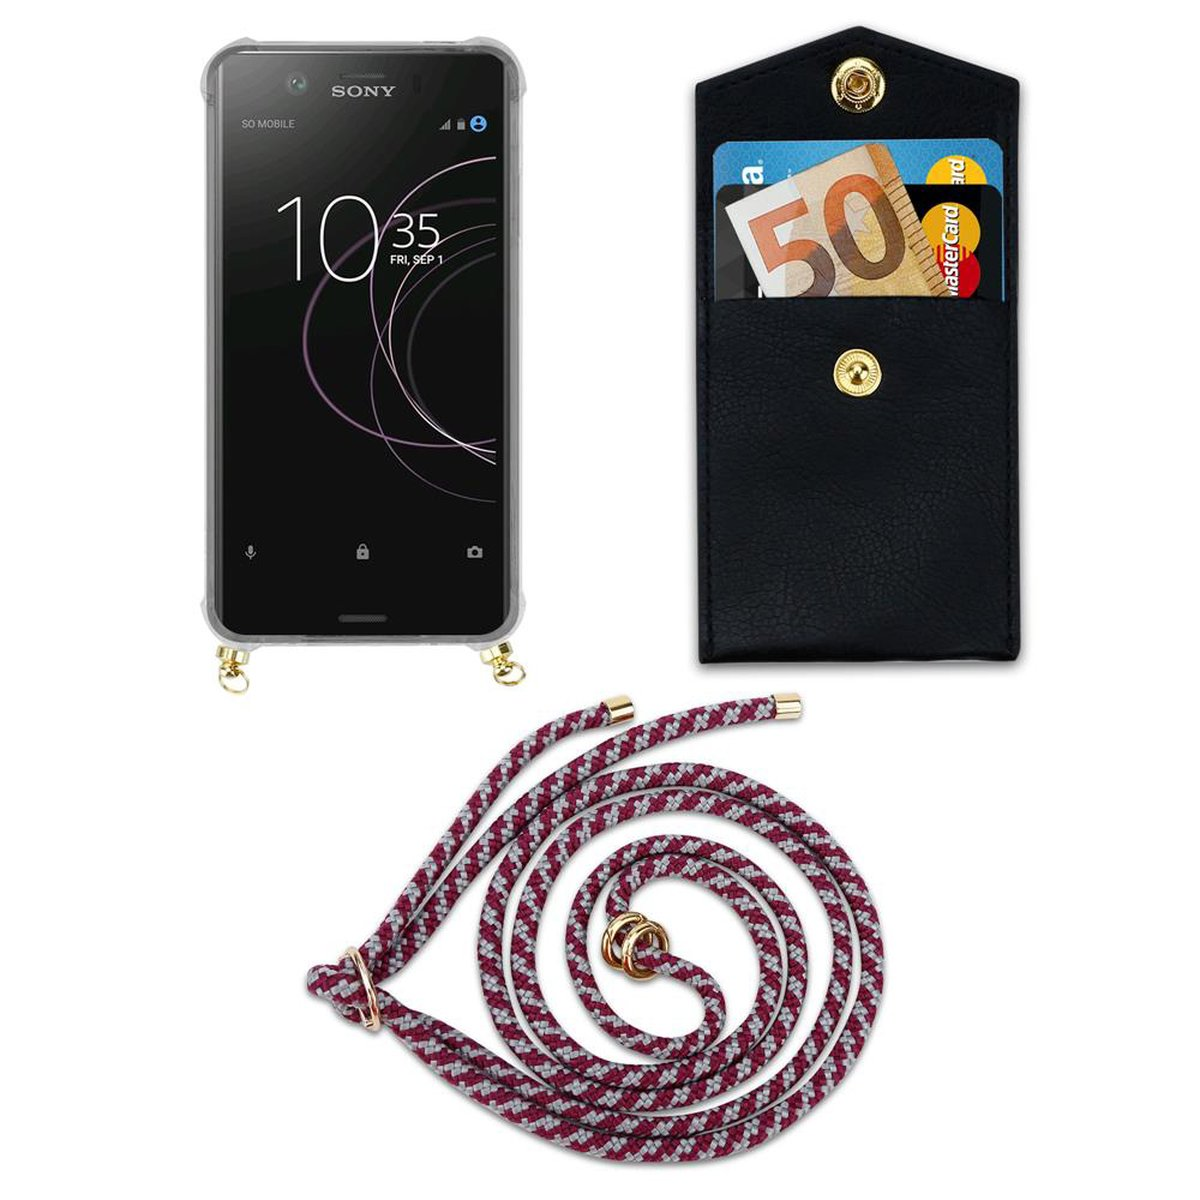 Handy abnehmbarer Xperia Ringen, CADORABO Band Backcover, Kordel und Gold Sony, Kette XZ1, WEIß ROT Hülle, mit